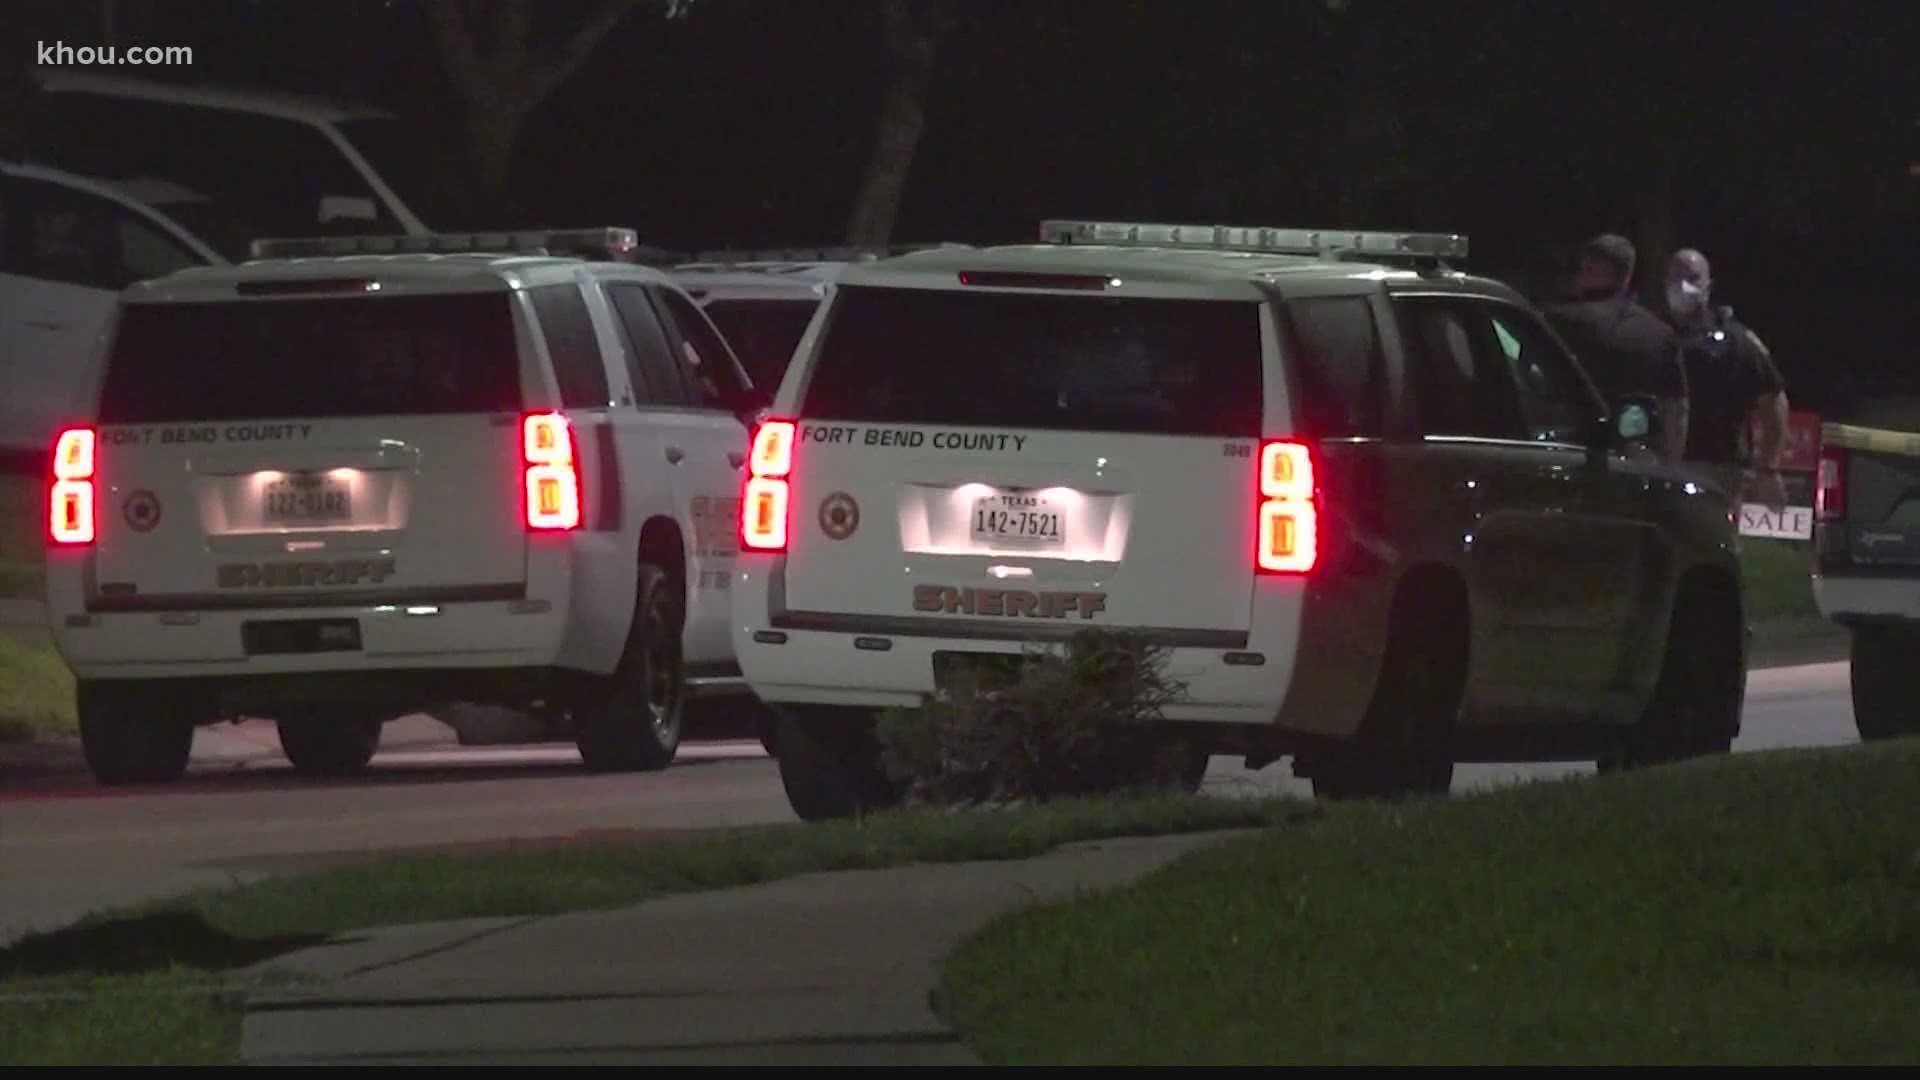 Deputies said a man shot and killed his wife who was staying at a friend's house in the Katy area. He then killed himself.